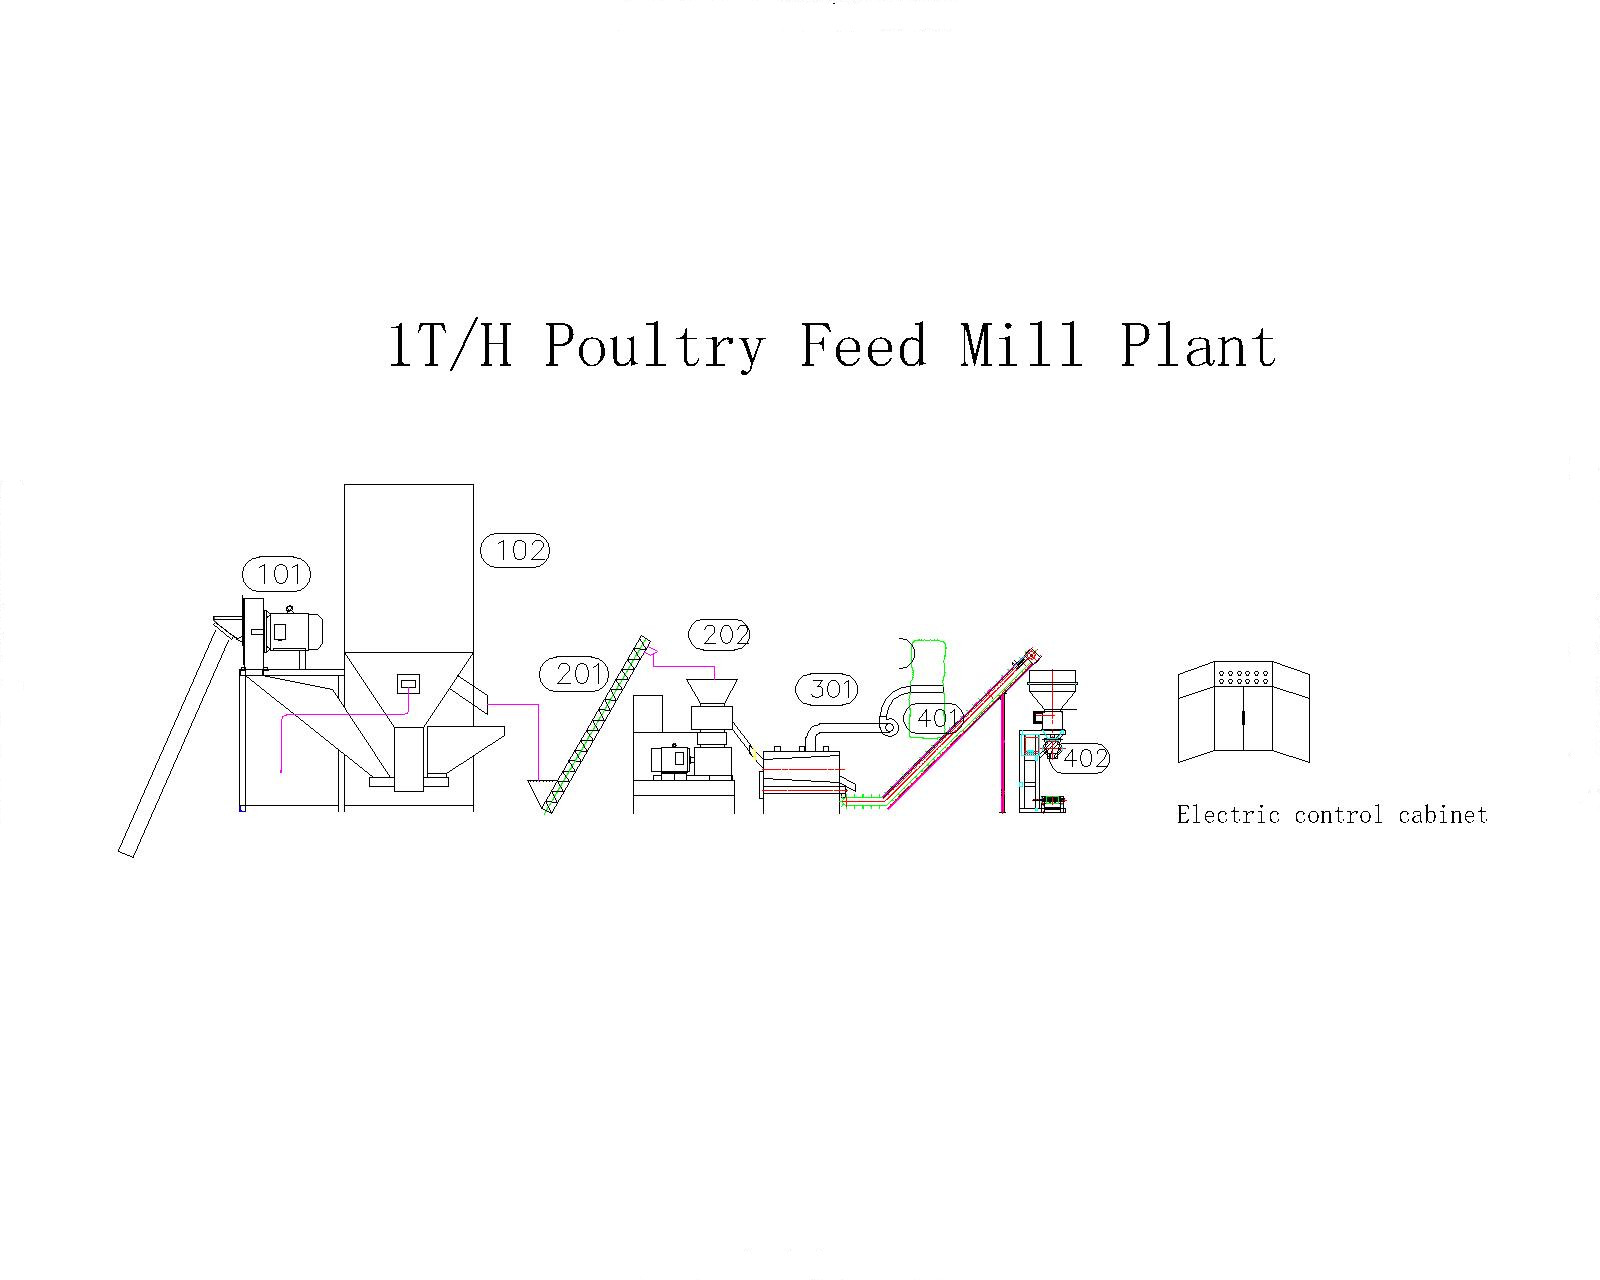 1T/H Poultry Feed Mill Plant